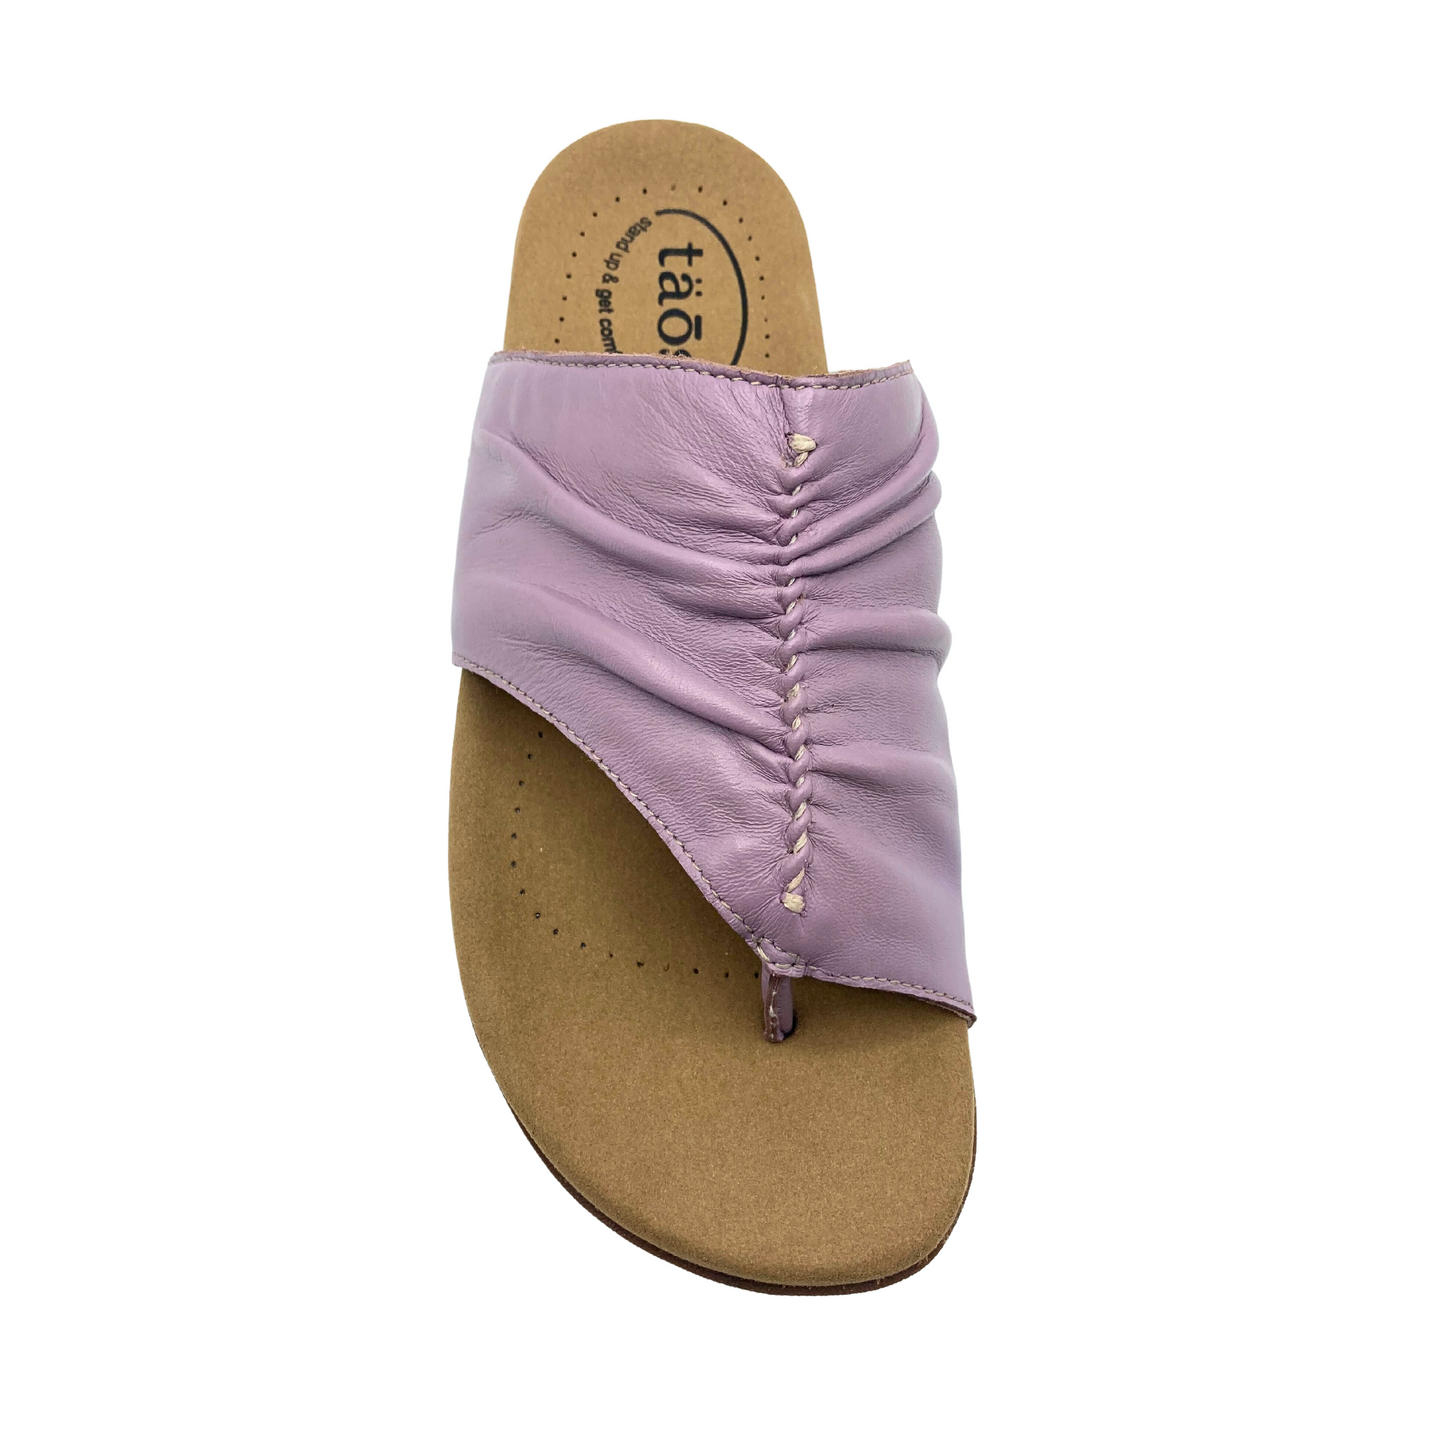 Top down view of the Taos Gift 2 in Lavender.  Stitch detail from toe post across the top provides a ruching detail.